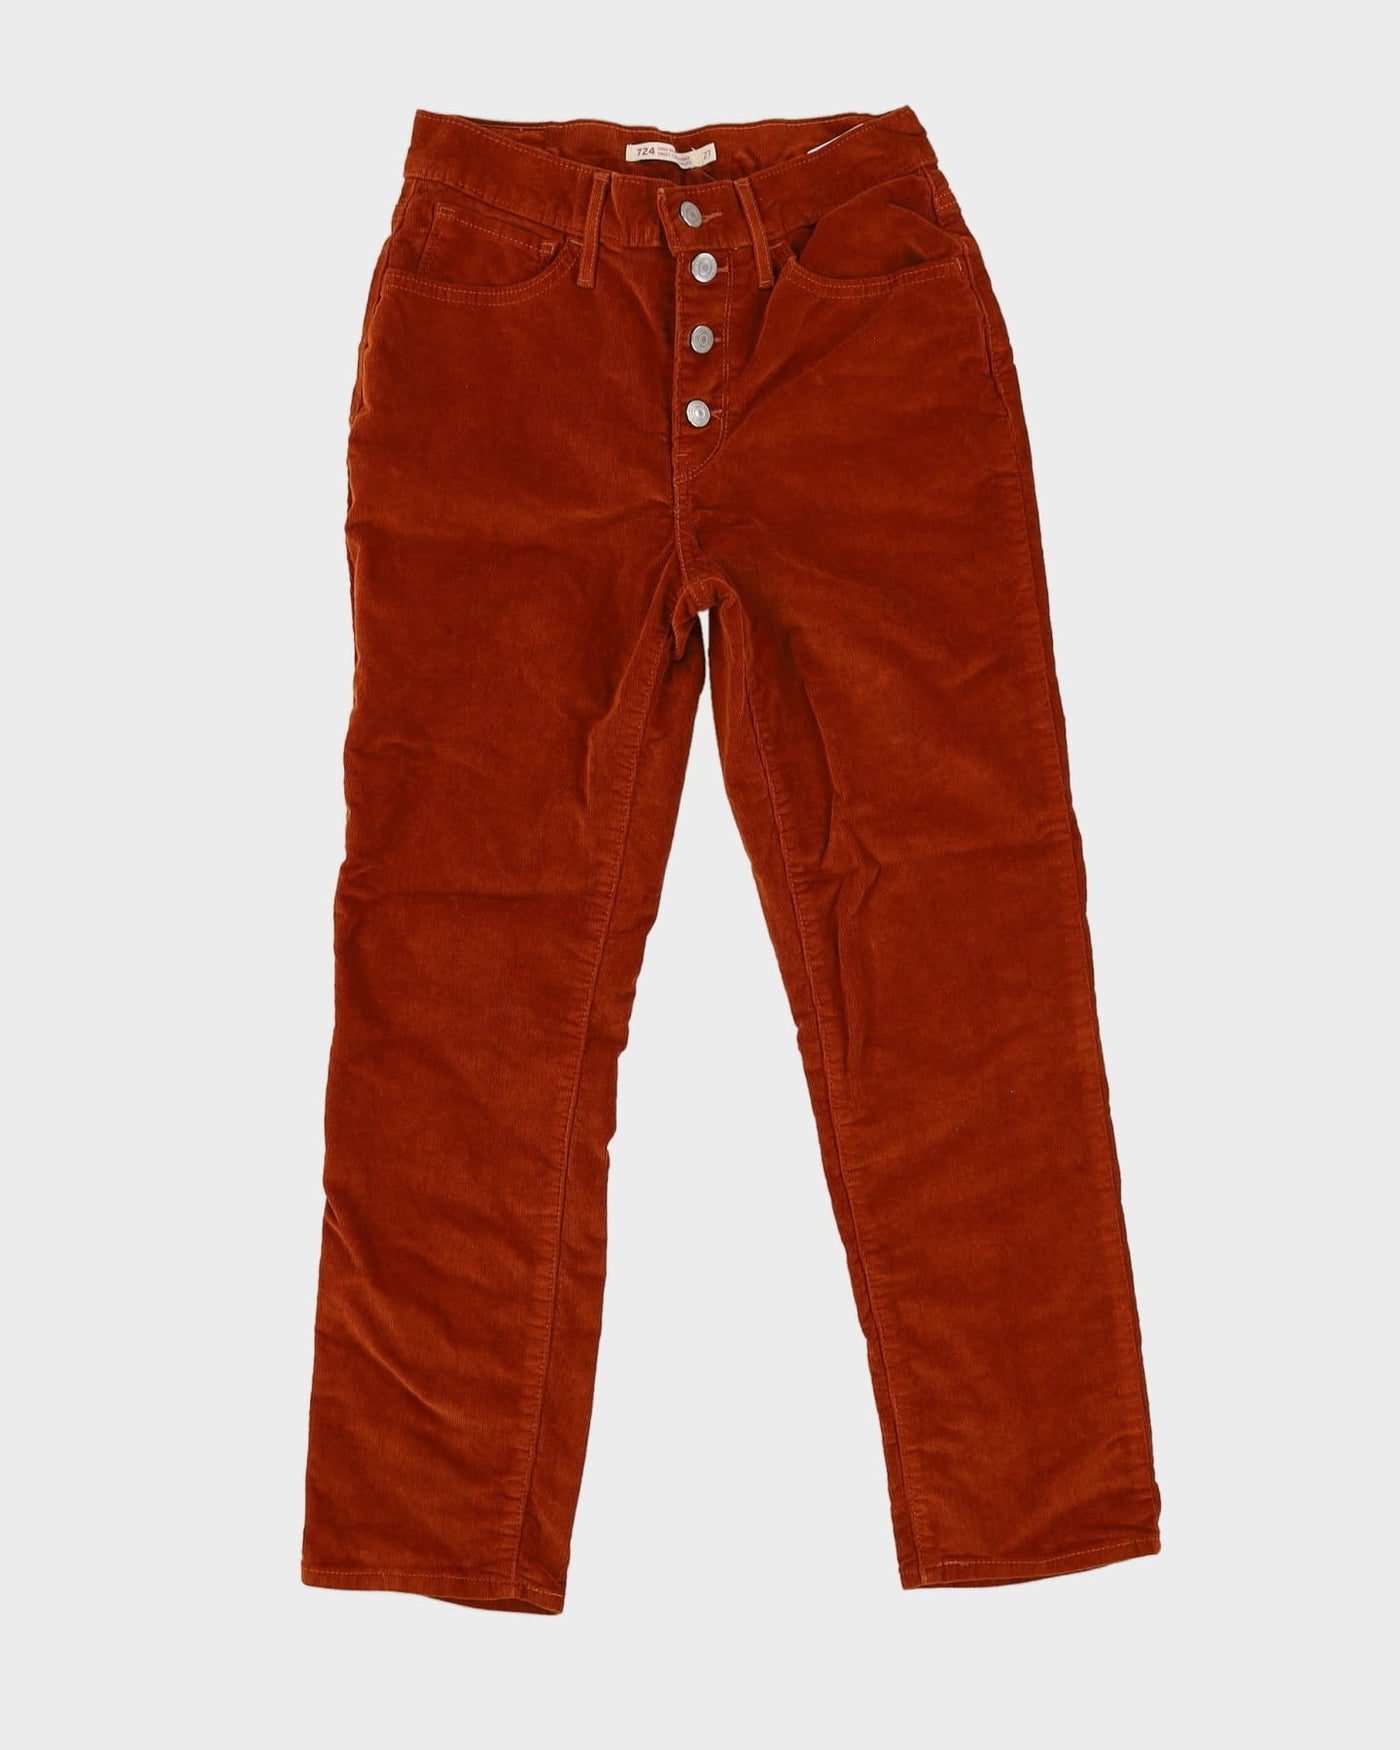 Levi's Brown Cord Trousers - W27 L25